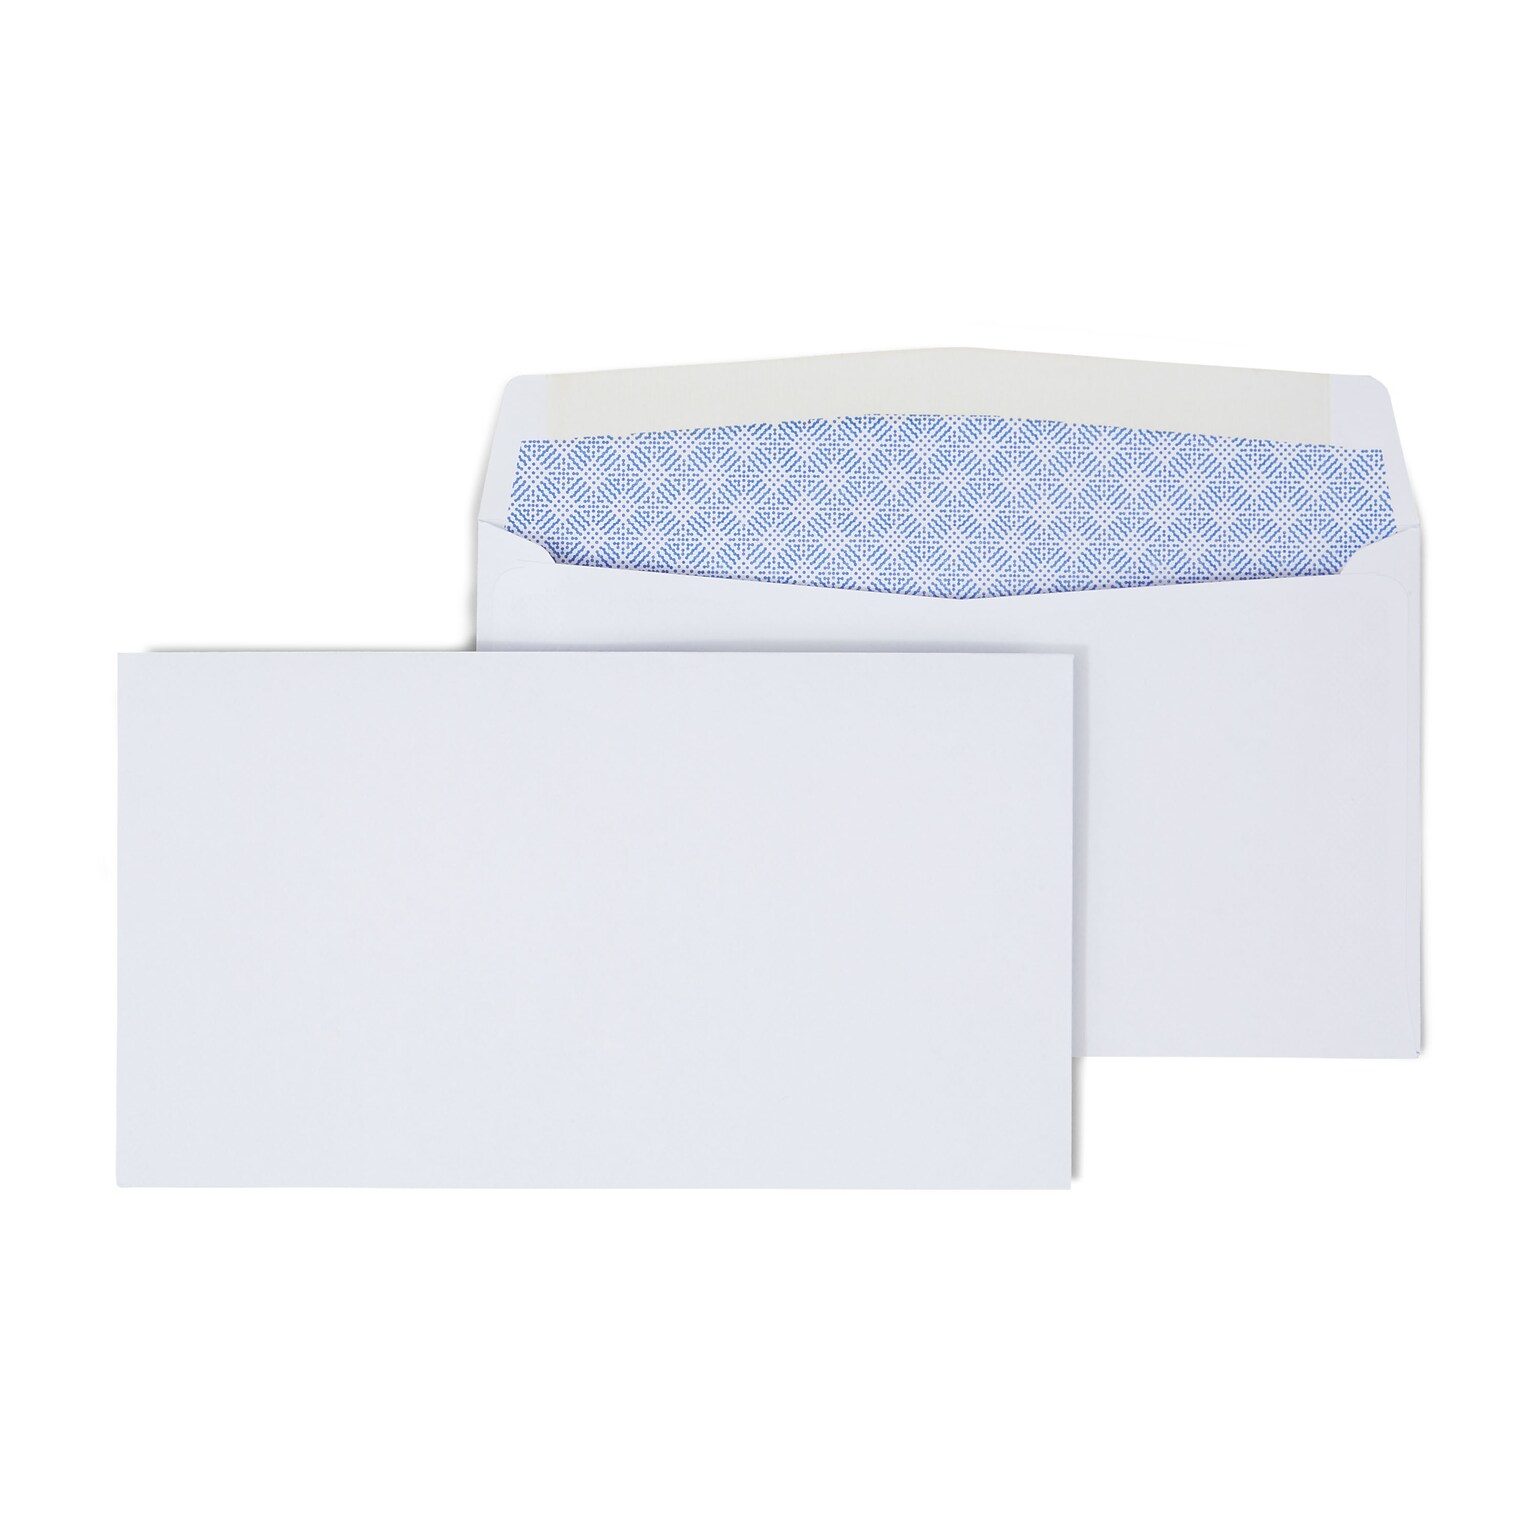 Quill Brand Gummed Security Tinted #6 3/4 Business Envelope, 3 5/8 x 6 1/2, White, 250/Box (NULL)